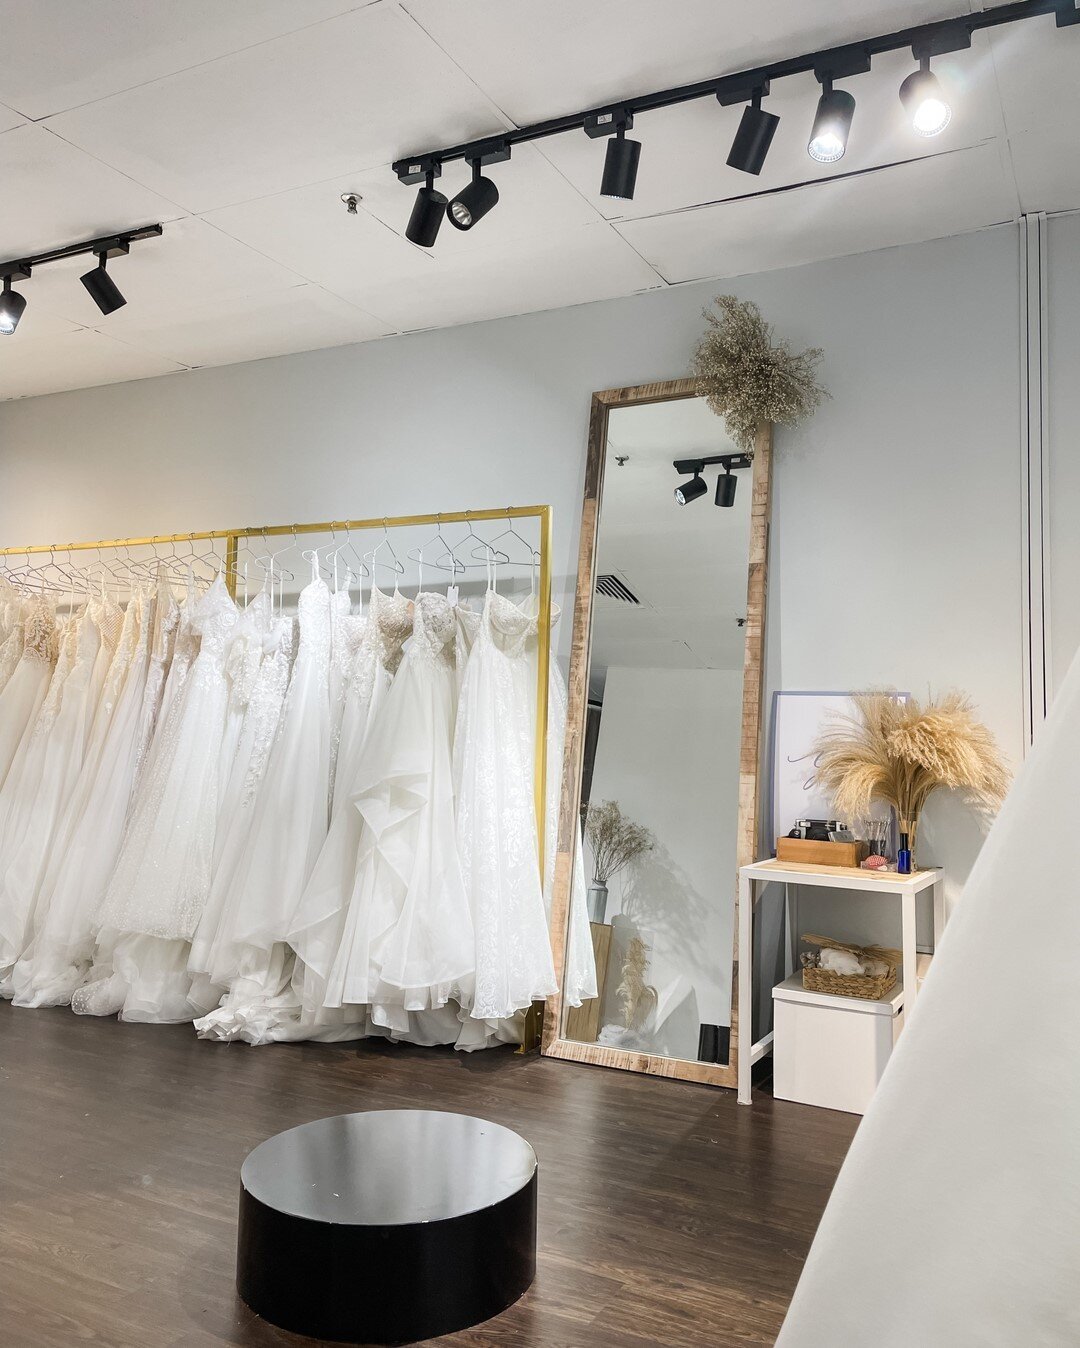 Have you visited our space? ✨ Get ready to say yes with us - for our recent brides who said YES, thank you for trusting us and choosing us for your special day. We're so excited for you! ⠀⠀⠀⠀⠀⠀⠀⠀⠀
.⠀⠀⠀⠀⠀⠀⠀⠀⠀
.⠀⠀⠀⠀⠀⠀⠀⠀⠀
.⠀⠀⠀⠀⠀⠀⠀⠀⠀
#bloomingbride #brid